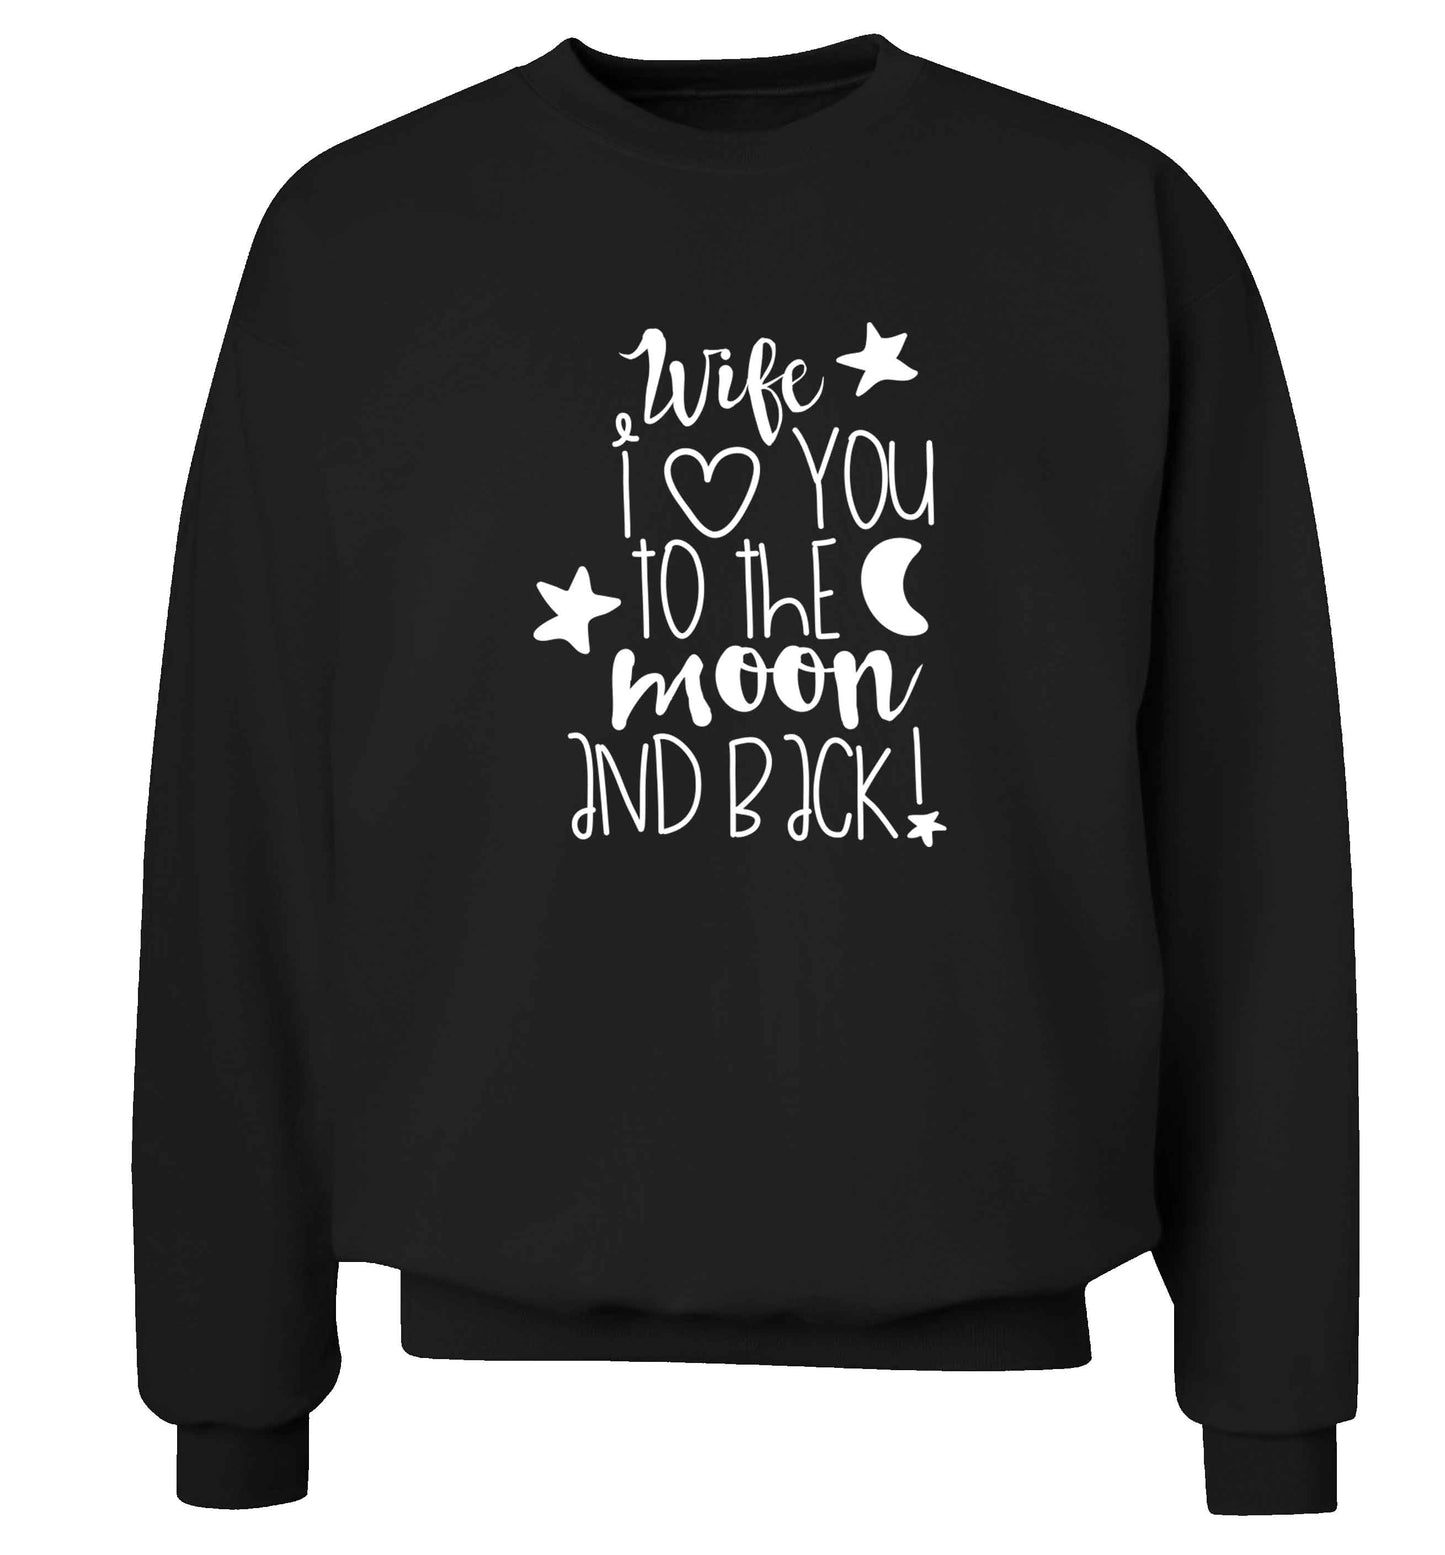 Wife I love you to the moon and back adult's unisex black sweater 2XL